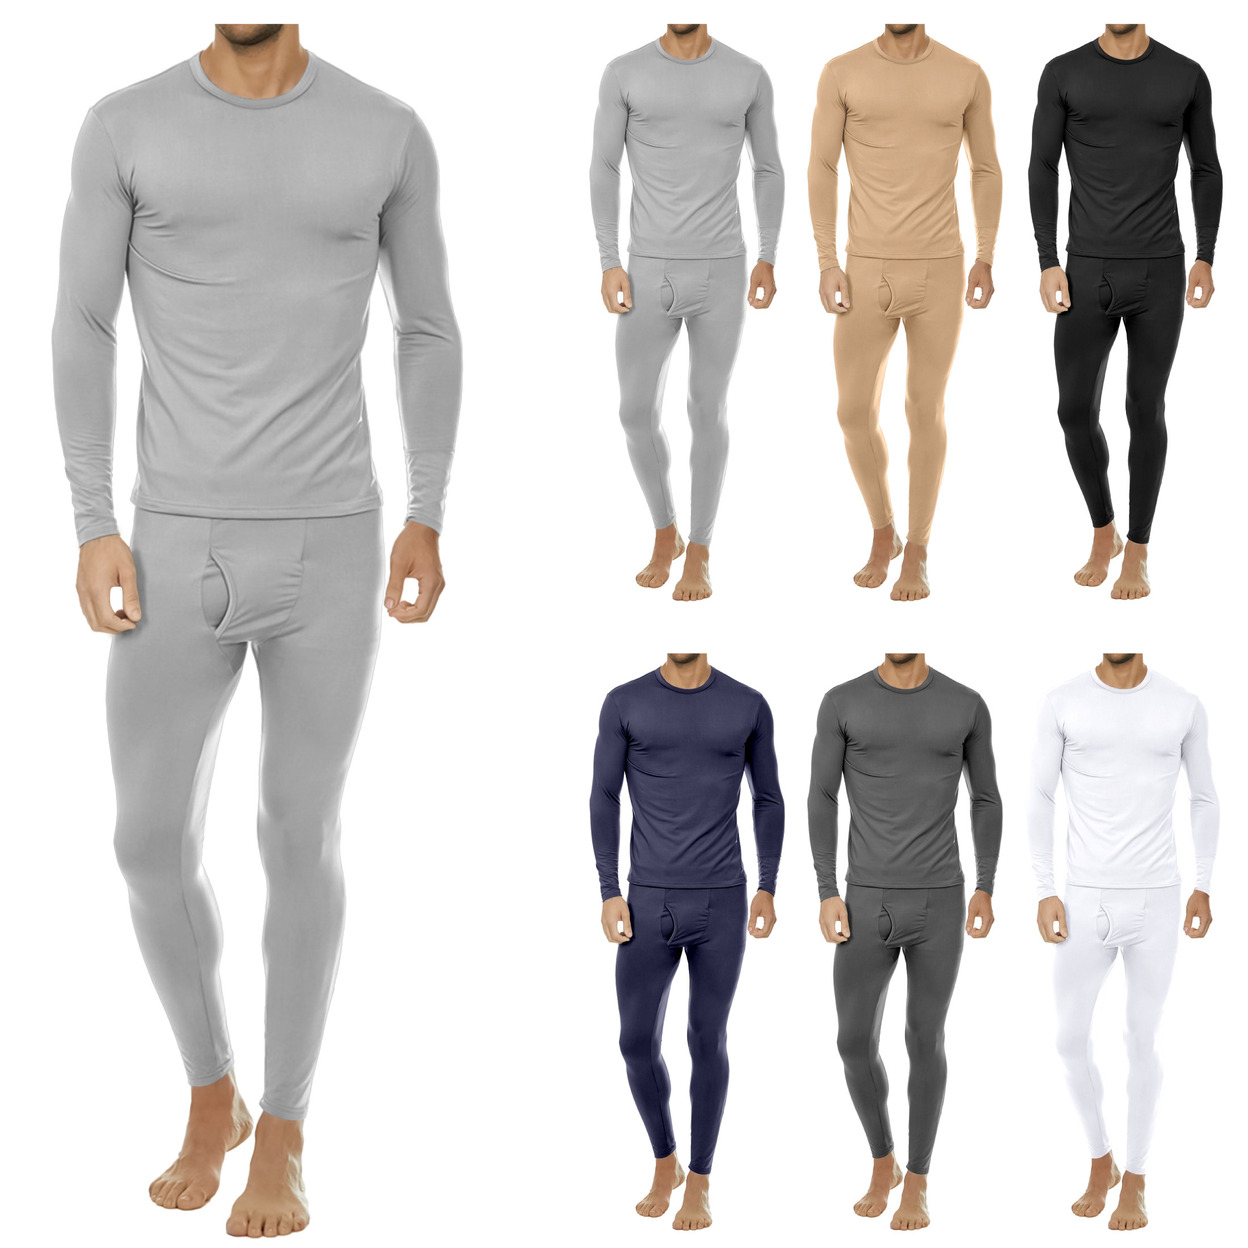 2-Sets: Men's Winter Warm Fleece Lined Thermal Underwear Set For Cold Weather - Grey&grey, Small